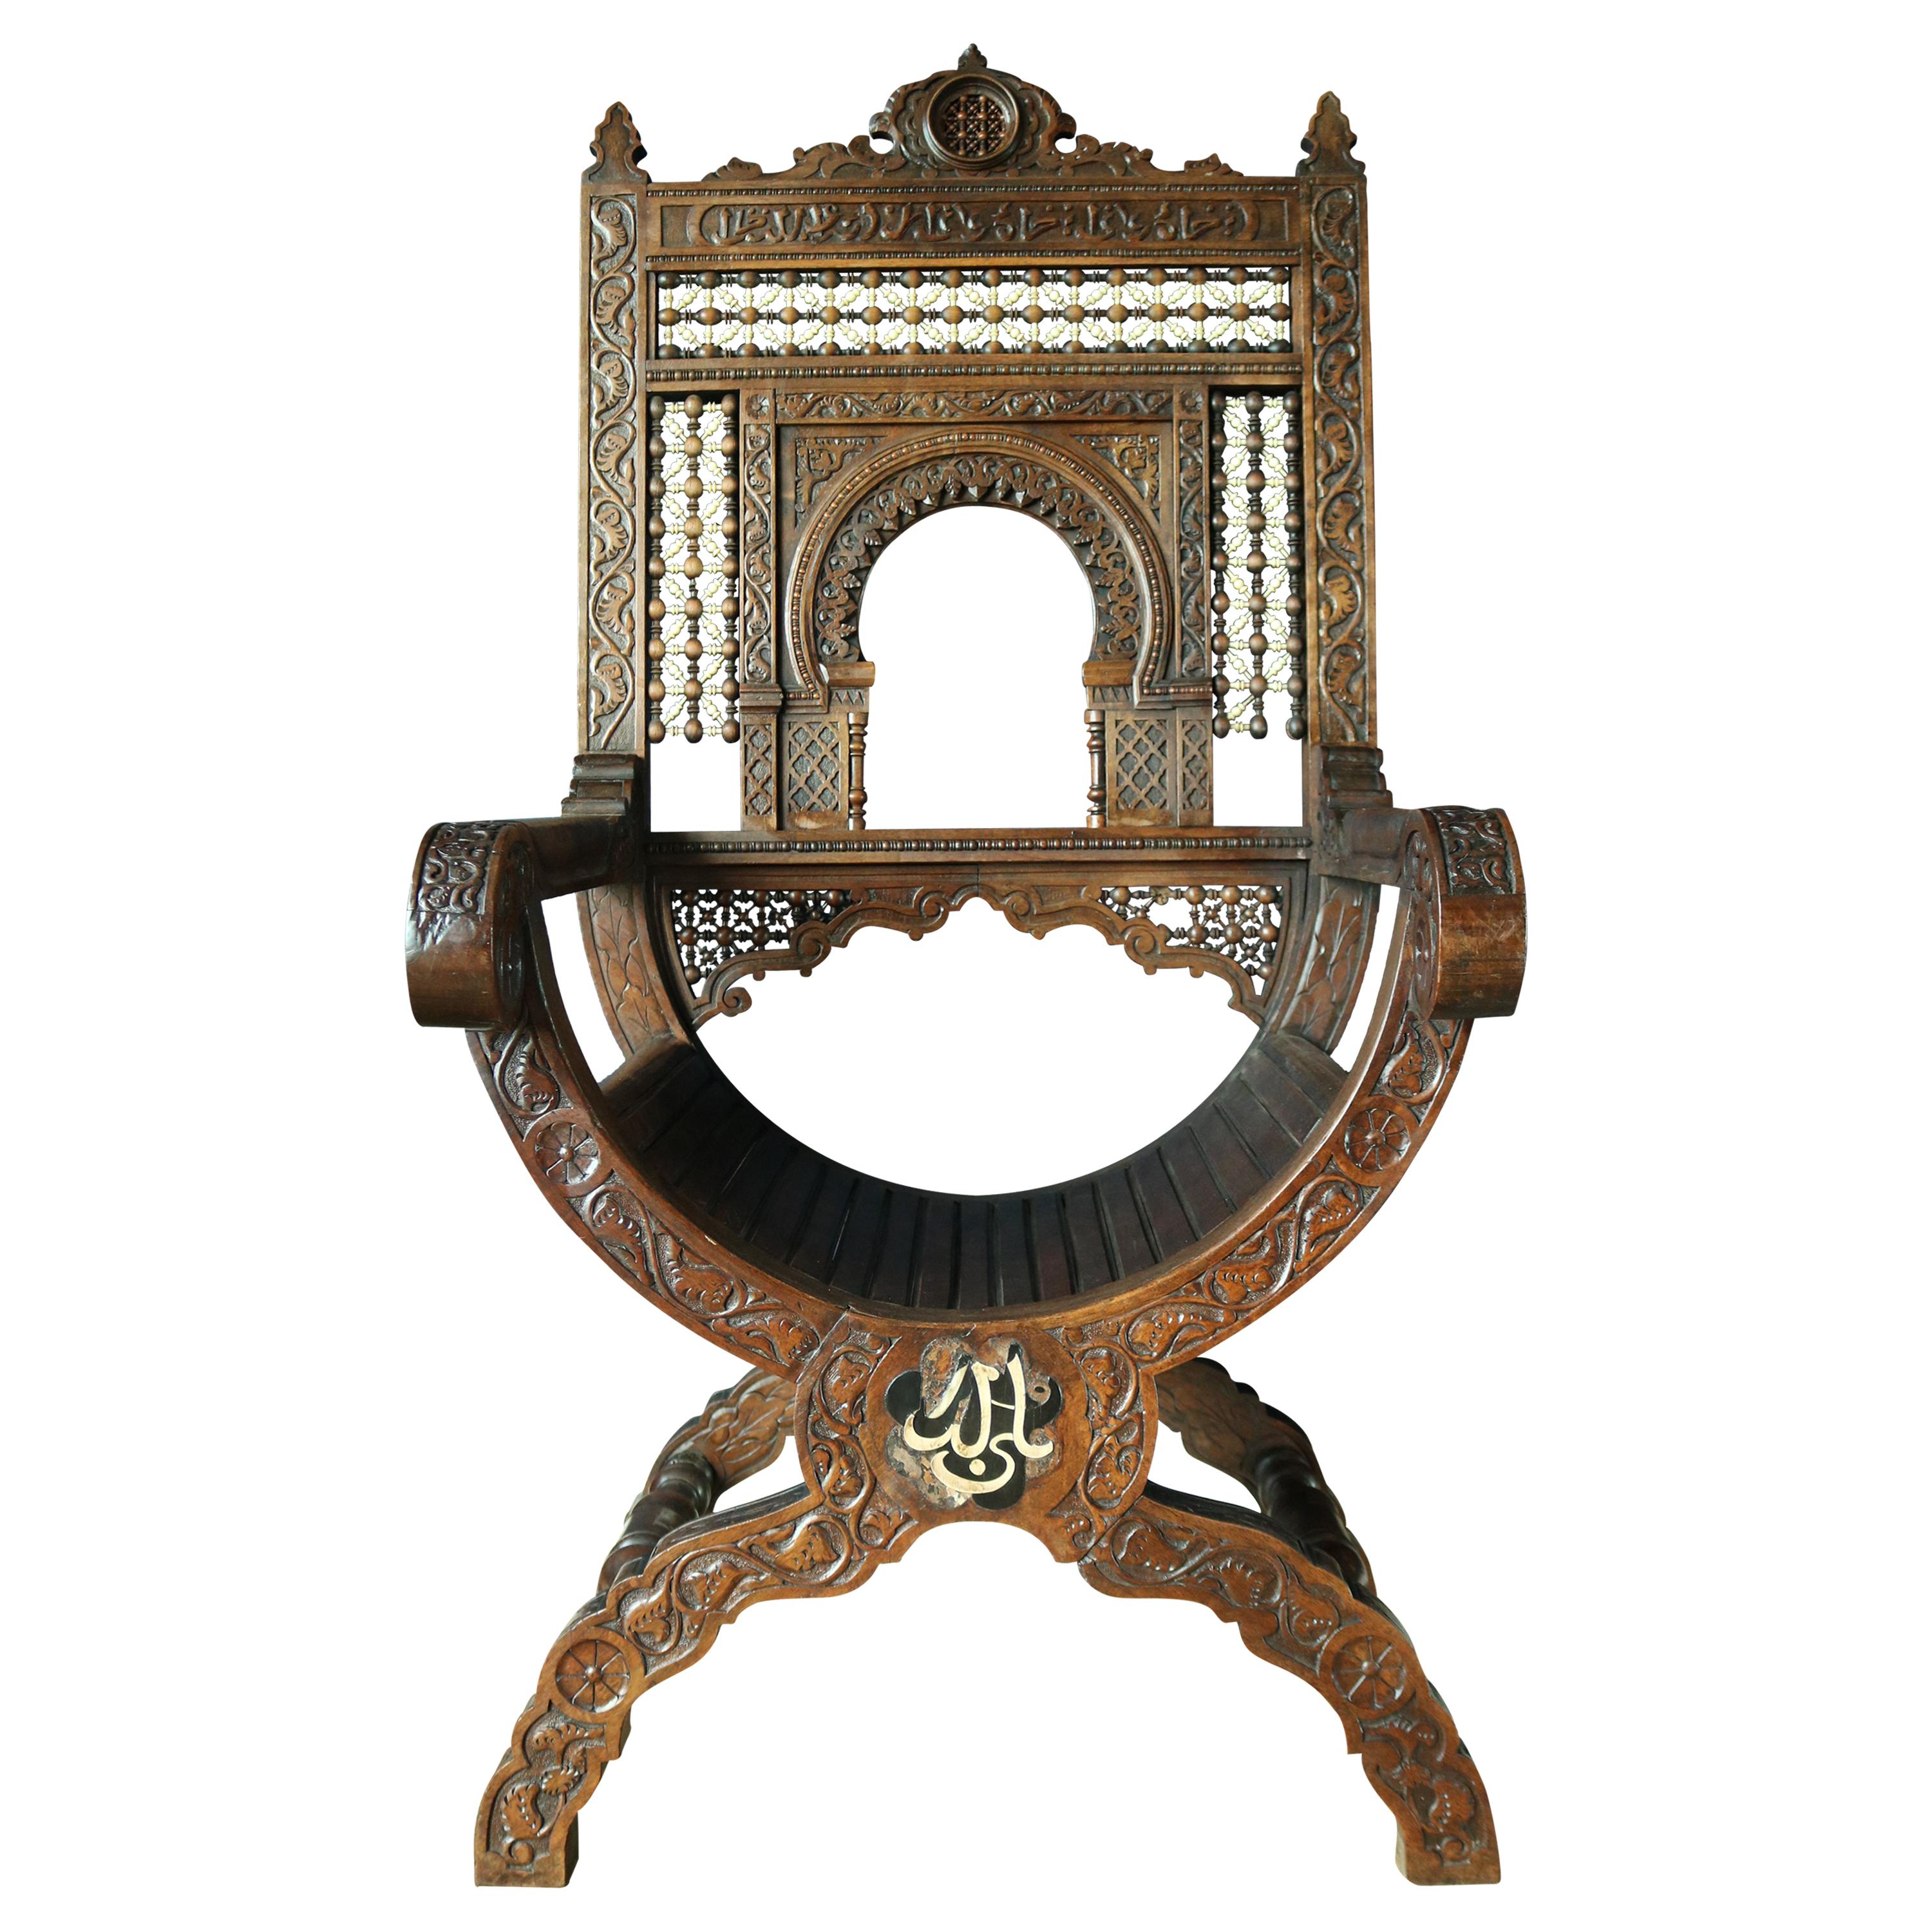 A exceptional 19th century Islamic armchair in the Morrish style probably from Damascus in Syria, beautifully carved with areas of Islamic script and on the back of the chair beautifully turned bone decoration, the chair is in remarkably good